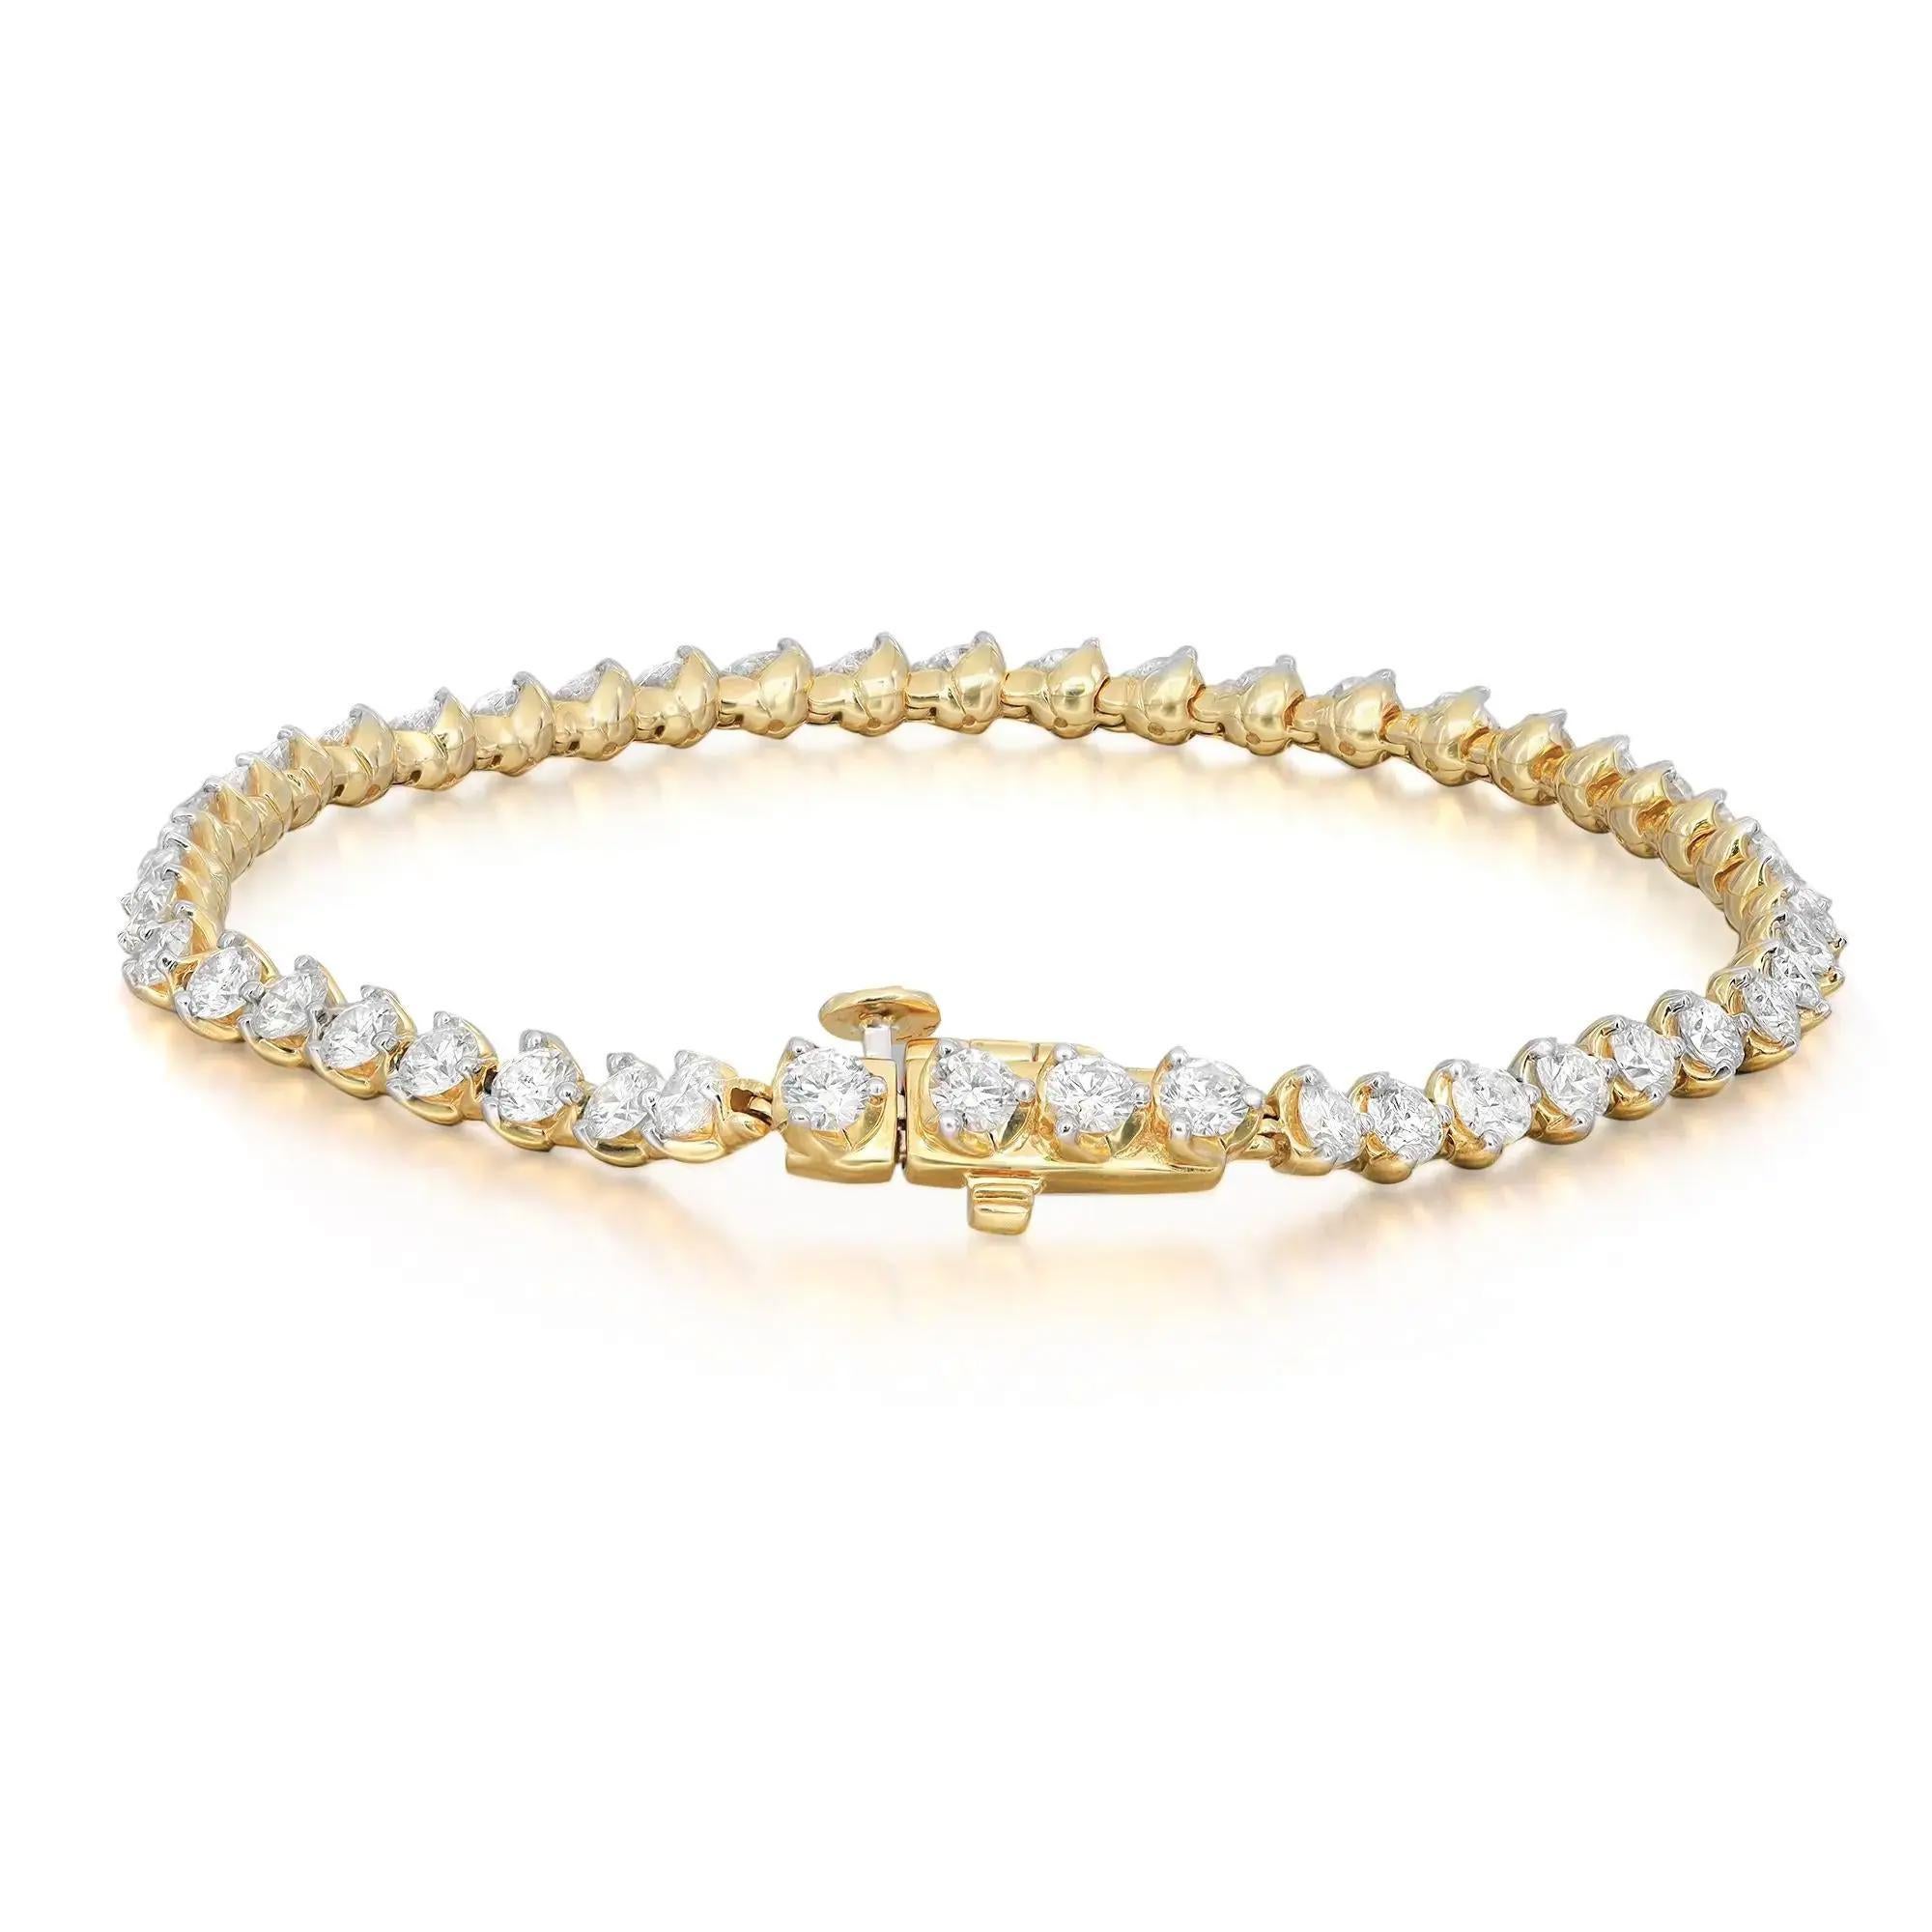 This exquisite Rachael Koen tennis bracelet features round brilliant cut diamonds in three prong setting style crafted in 14k yellow gold. Feminine and super wearable handmade modern creation is a great addition to your jewelry collection. This